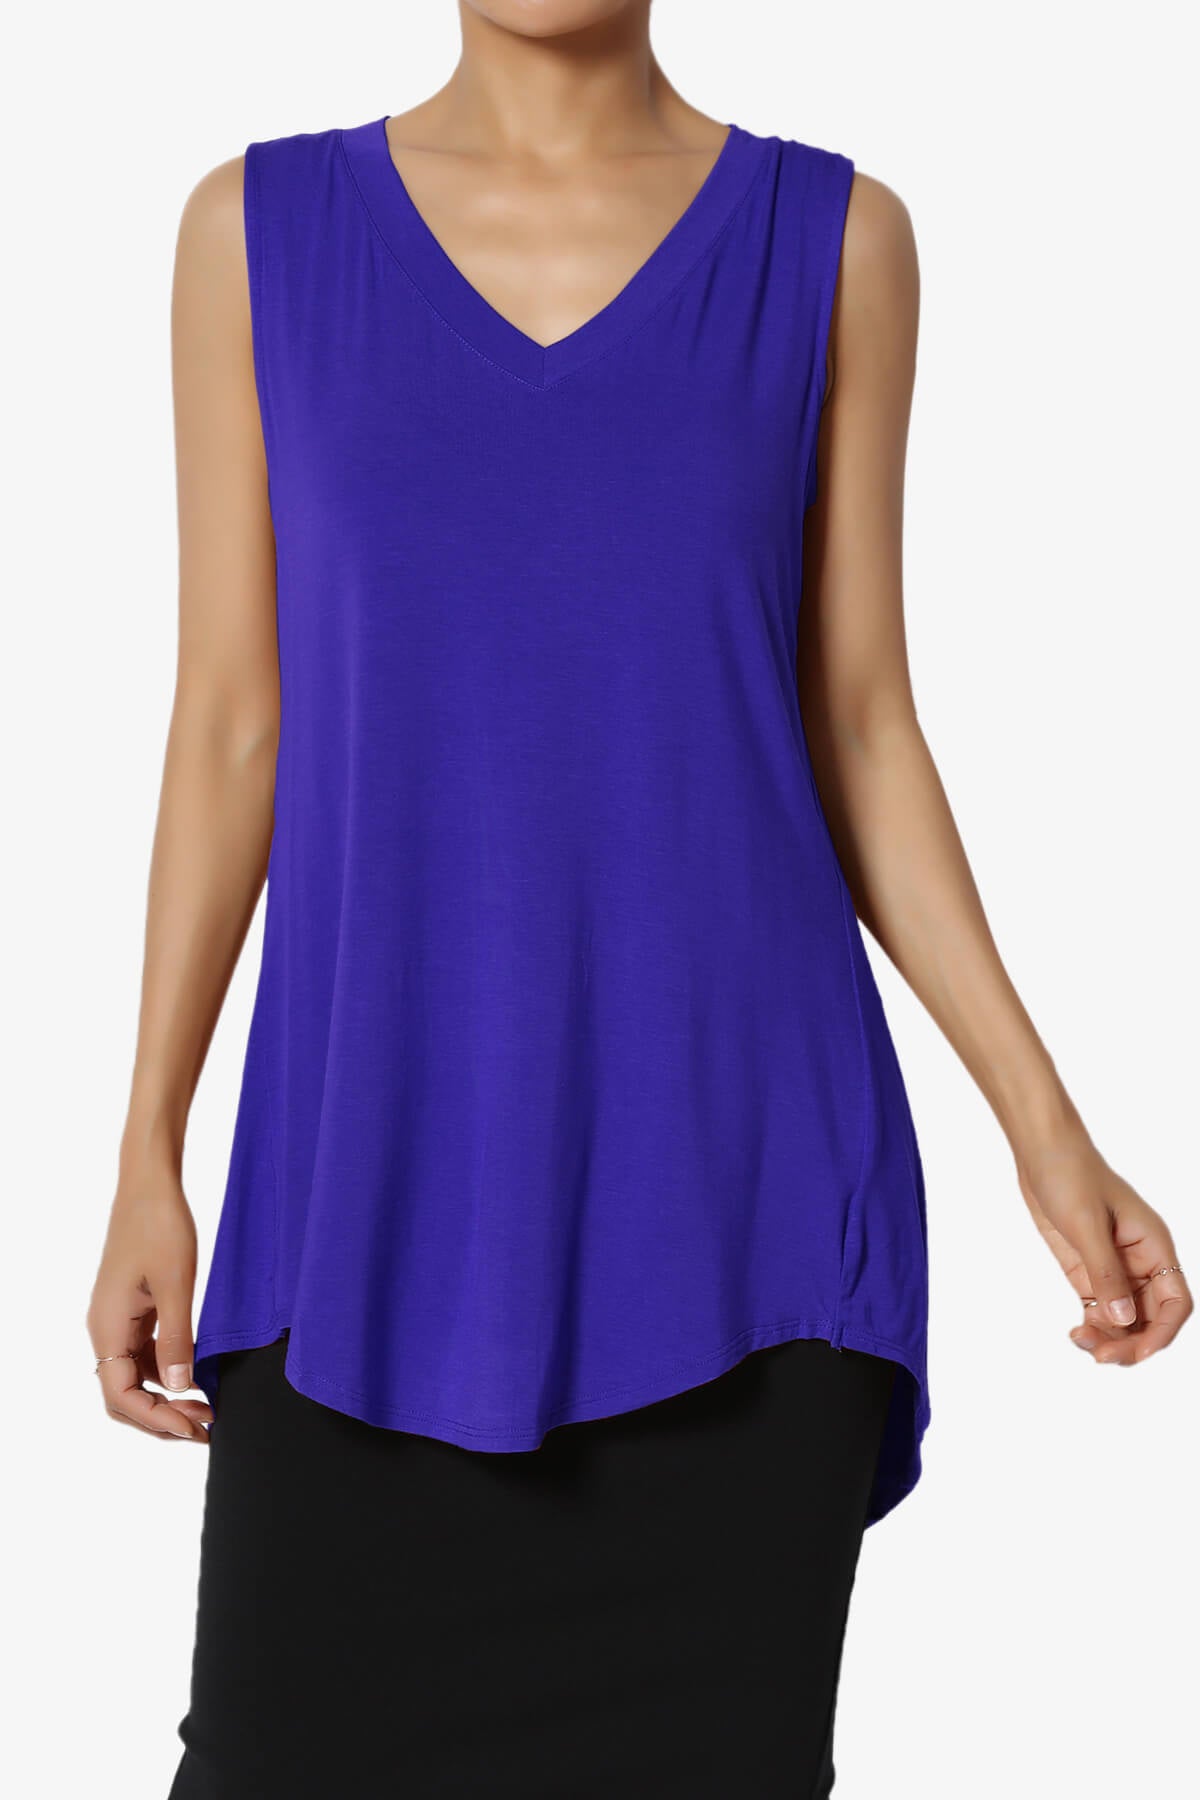 Load image into Gallery viewer, Myles Sleeveless V-Neck Luxe Jersey Top BRIGHT BLUE_1
